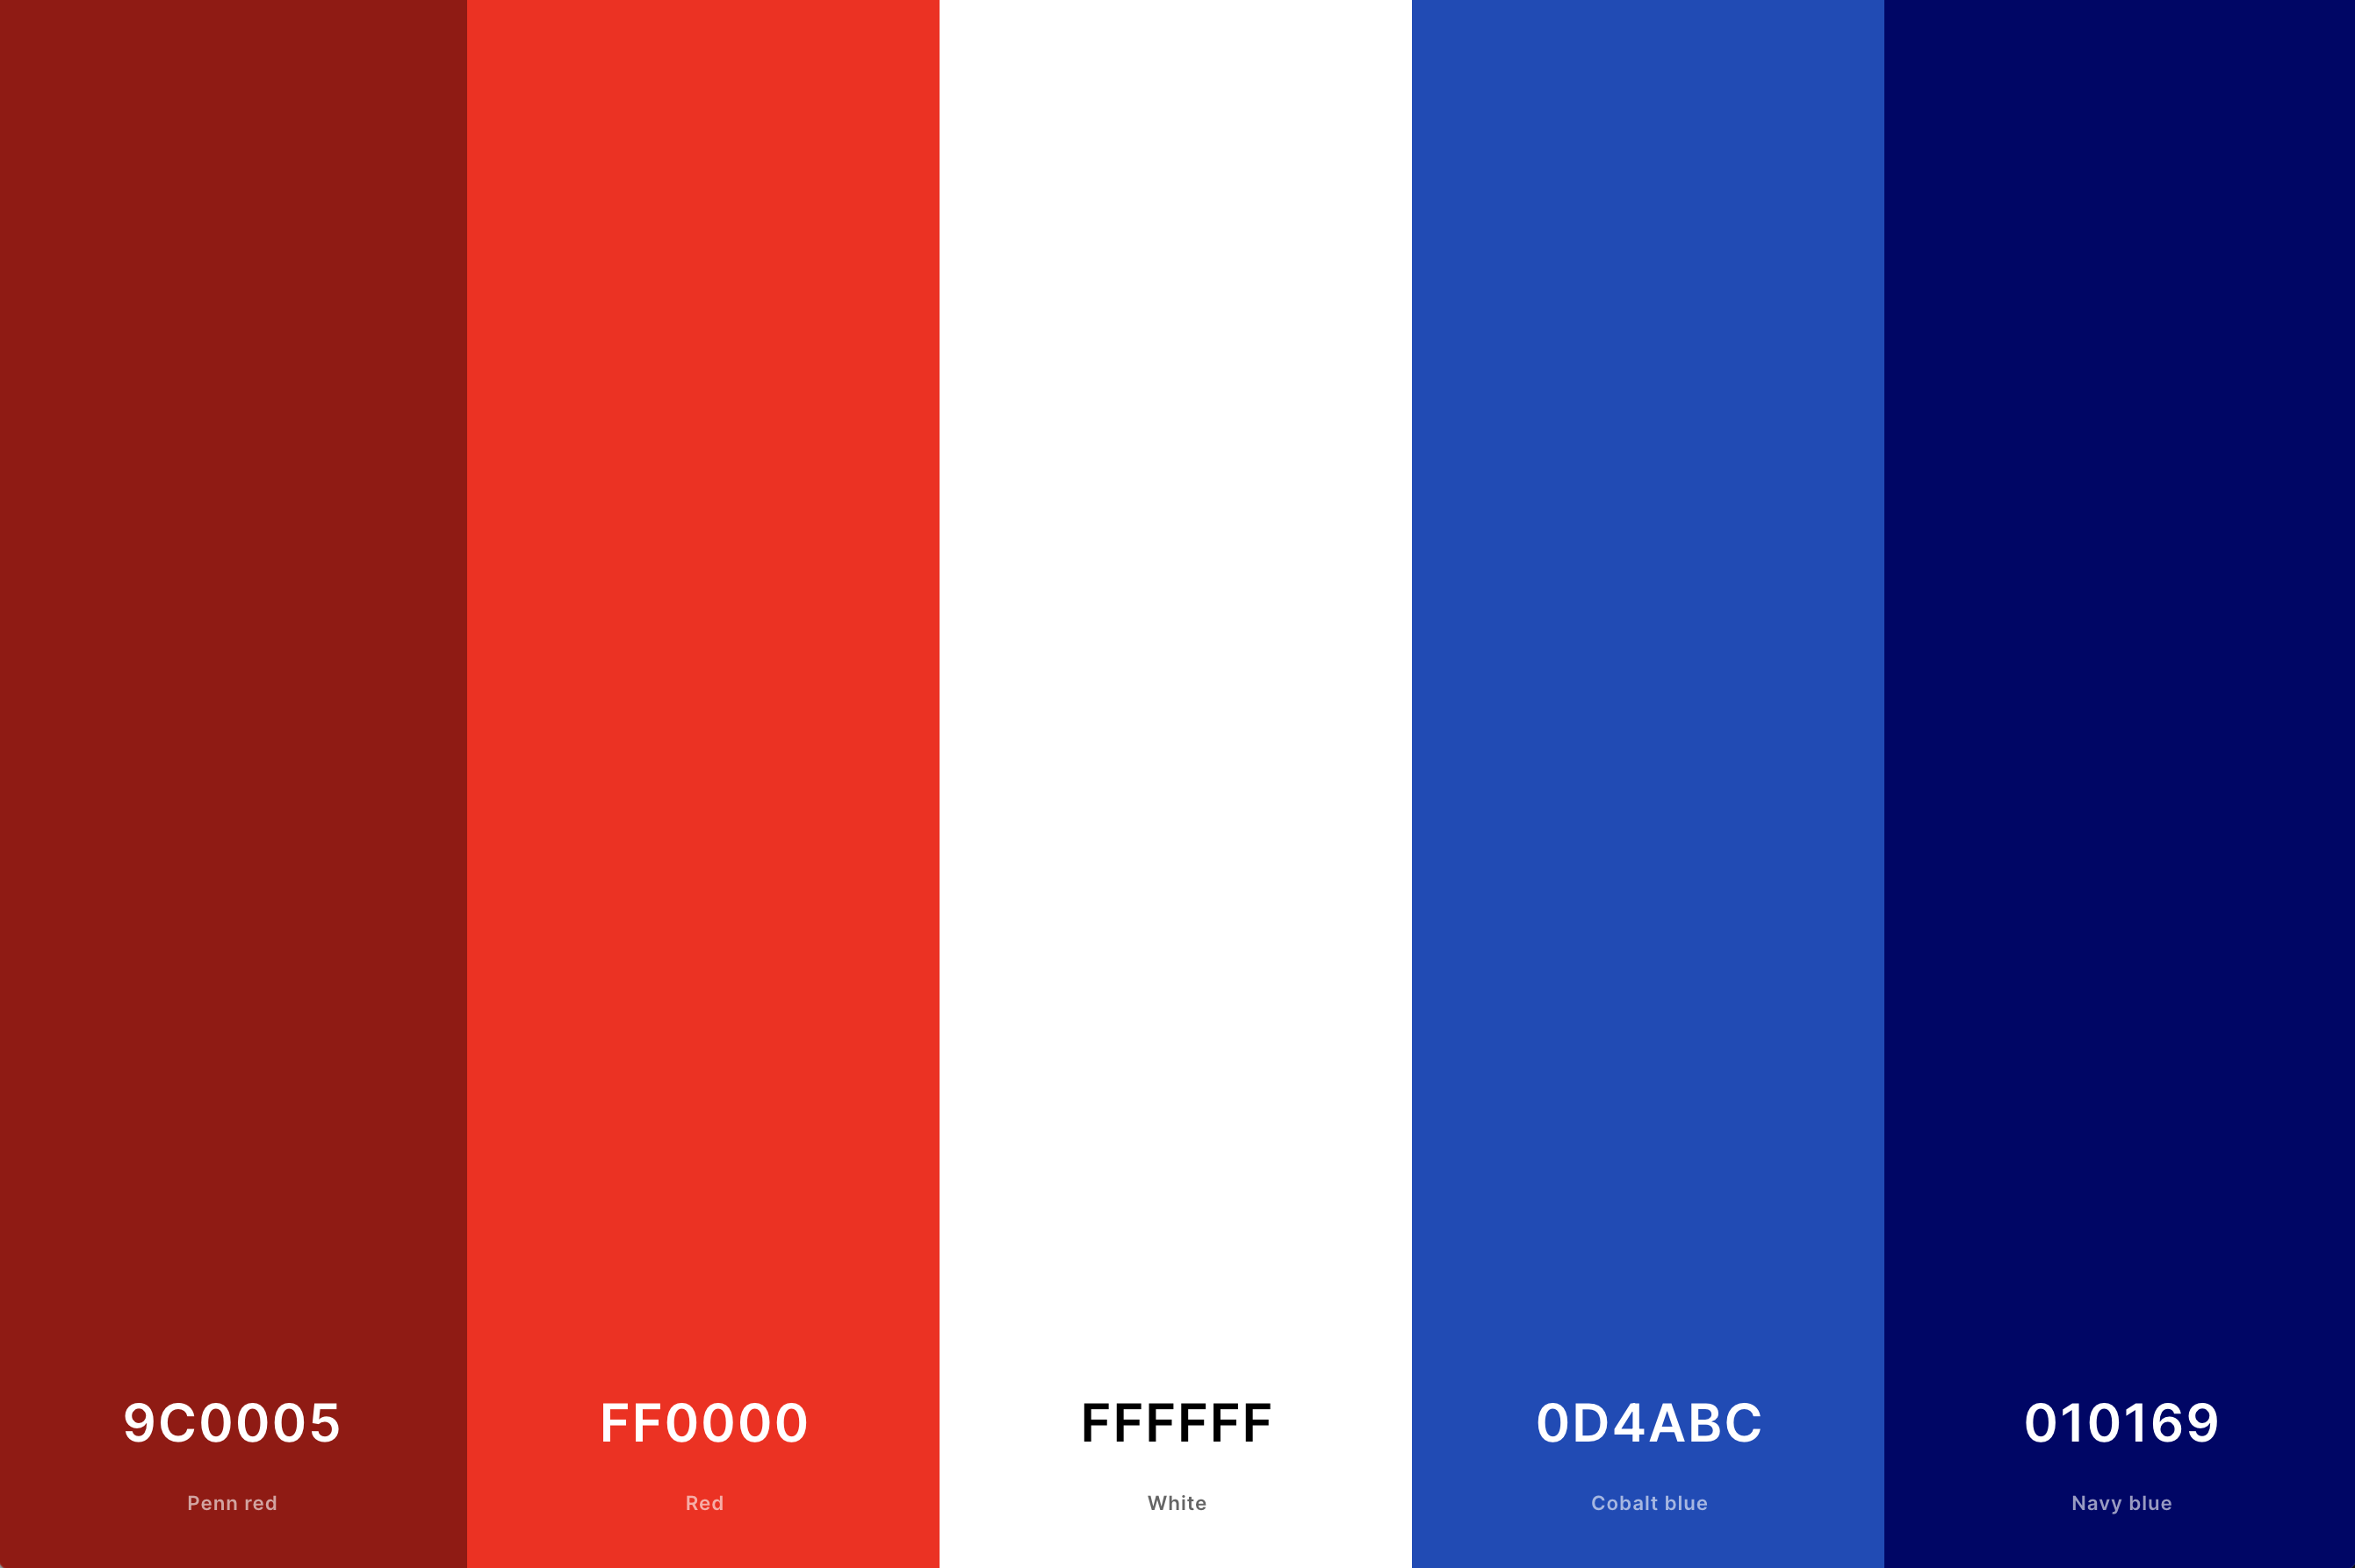 13. Red, White And Blue Color Palette Color Palette with Penn Red (Hex #9C0005) + Red (Hex #FF0000) + White (Hex #FFFFFF) + Cobalt Blue (Hex #0D4ABC) + Navy Blue (Hex #010169) Color Palette with Hex Codes